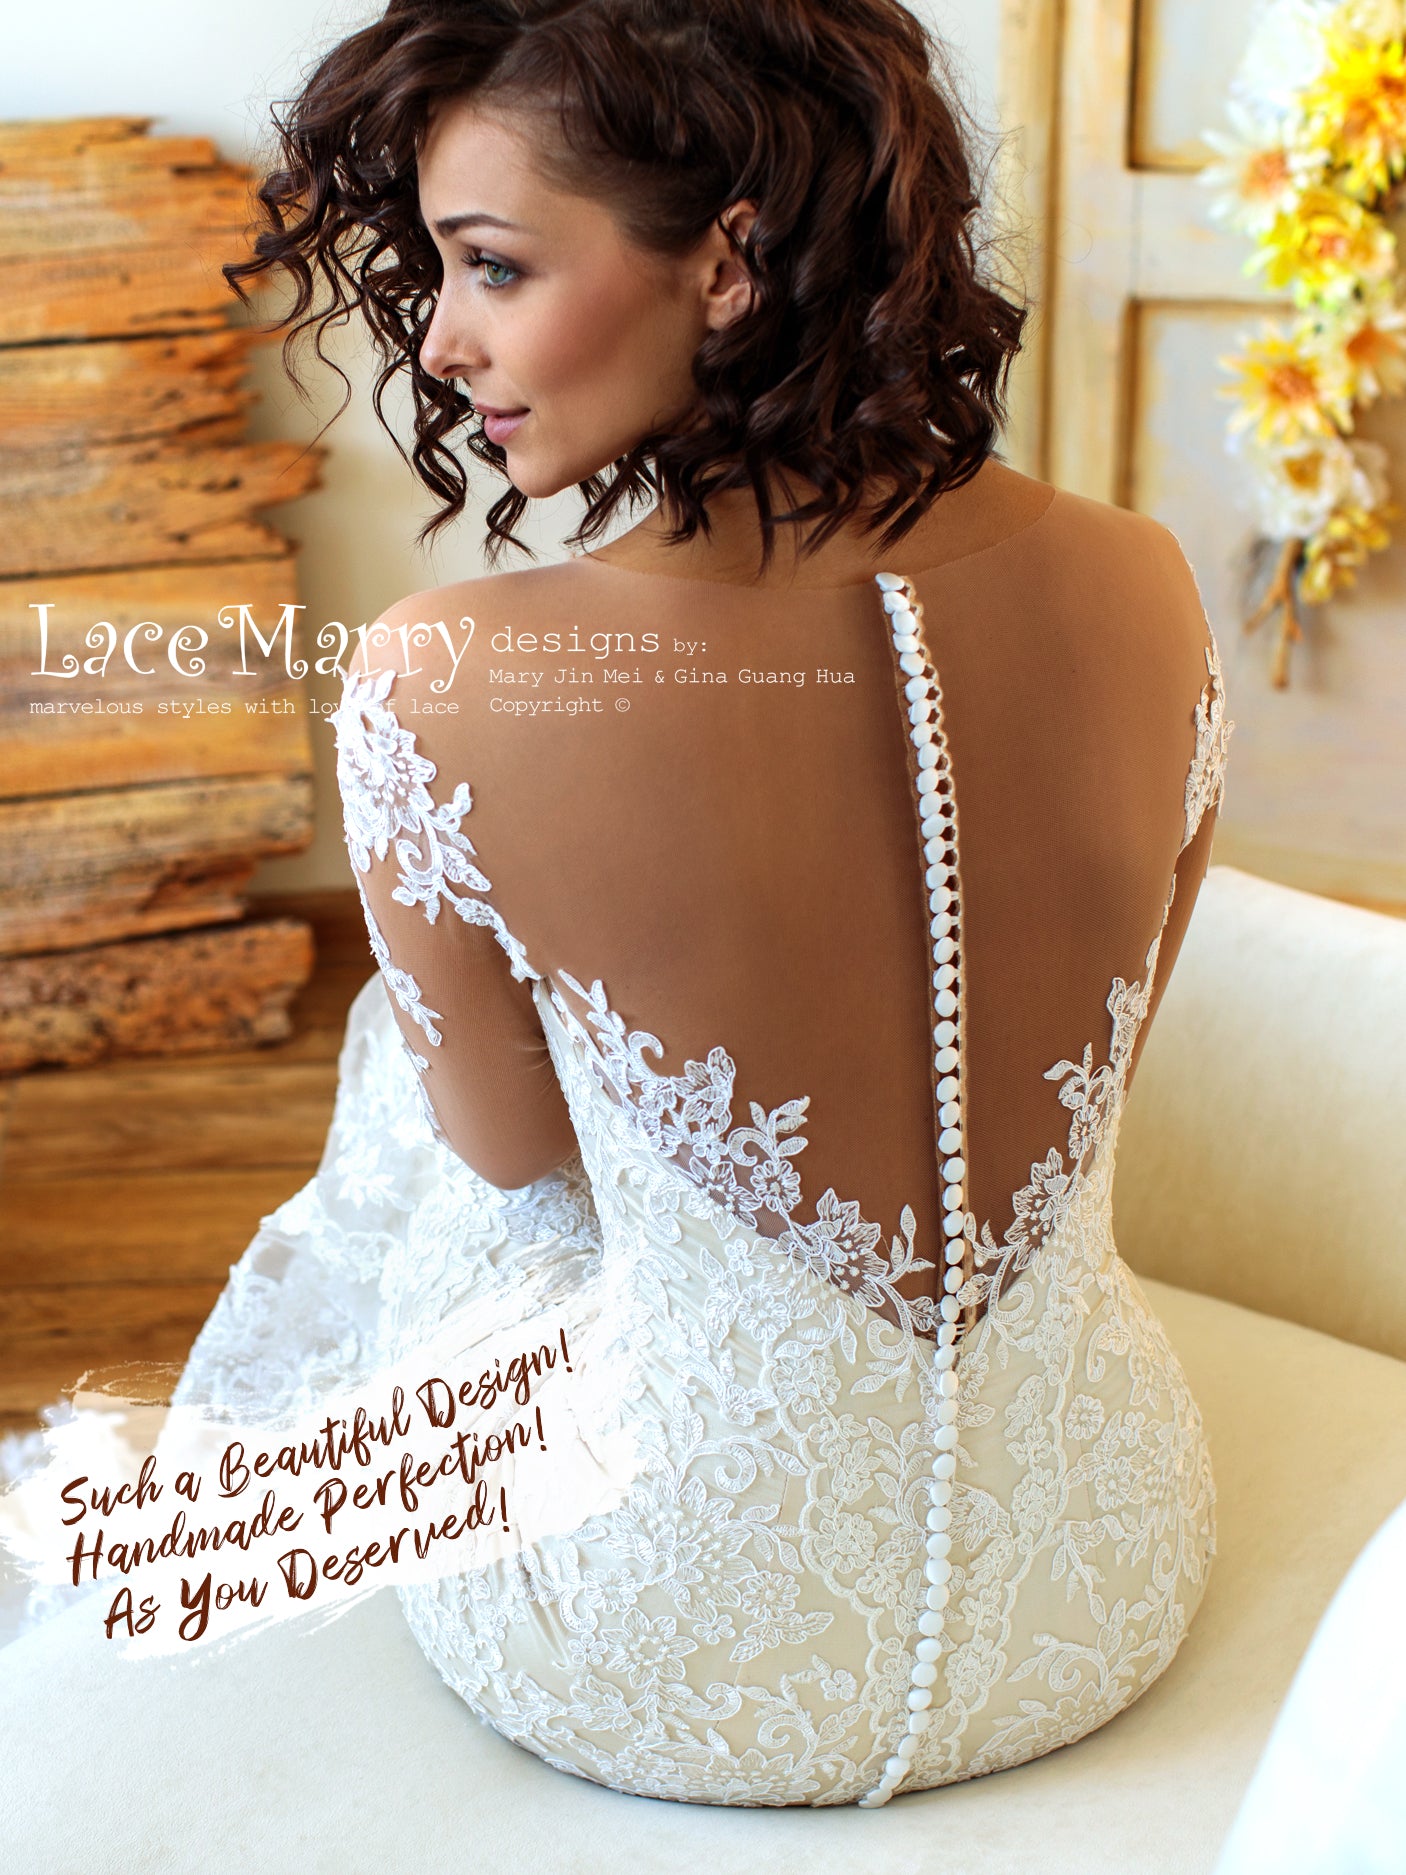 Stunning Backless Under Tight Dress With Bra For Wedding And